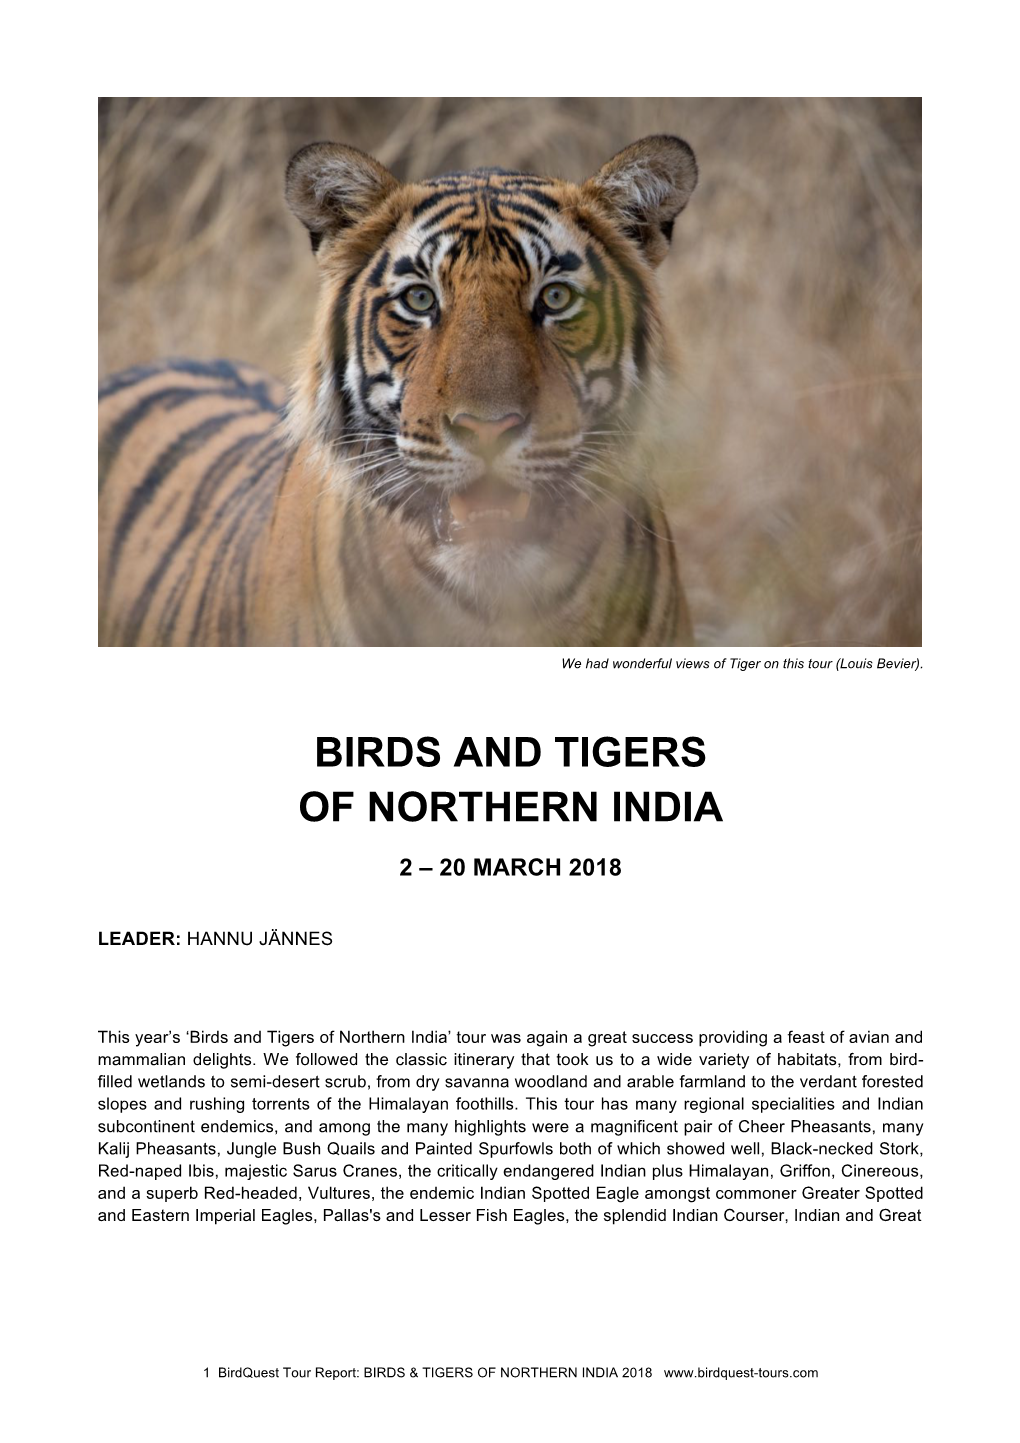 Birds and Tigers of Northern India